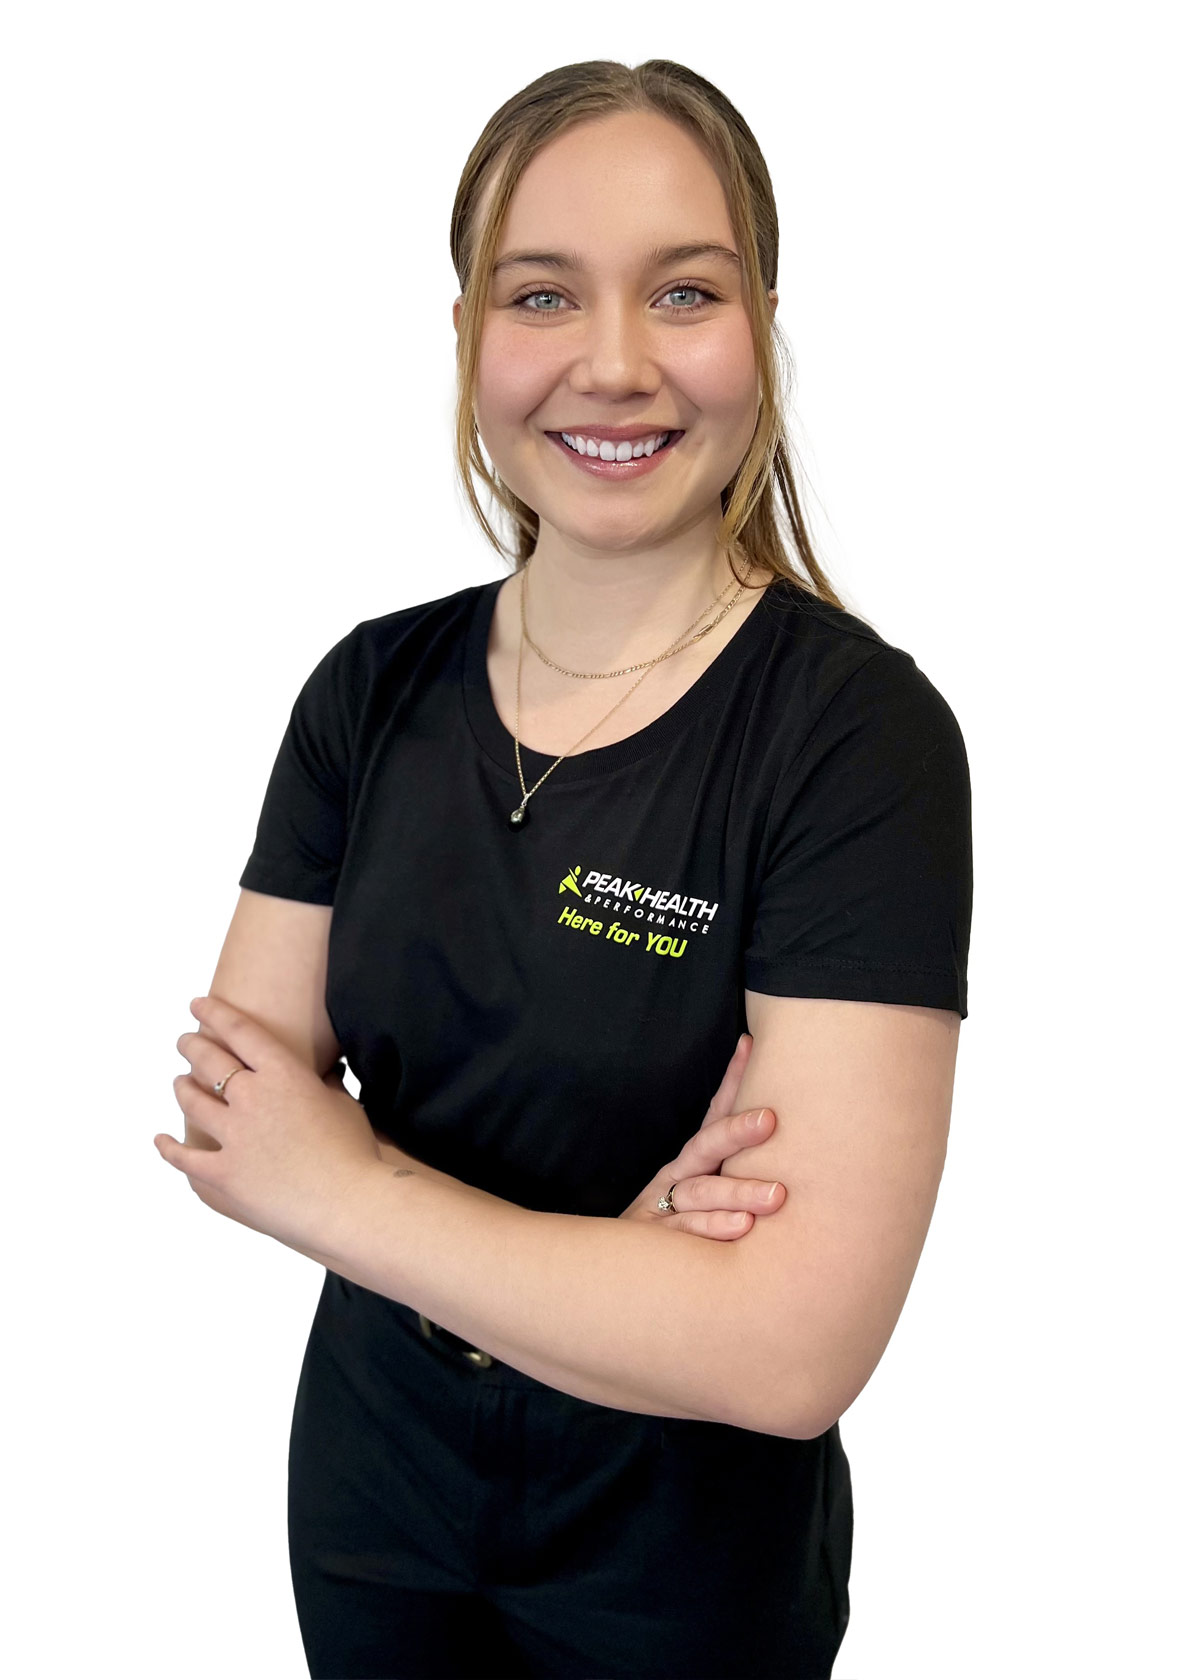 Caitlin Nauer Patient Experience Manager calgary 